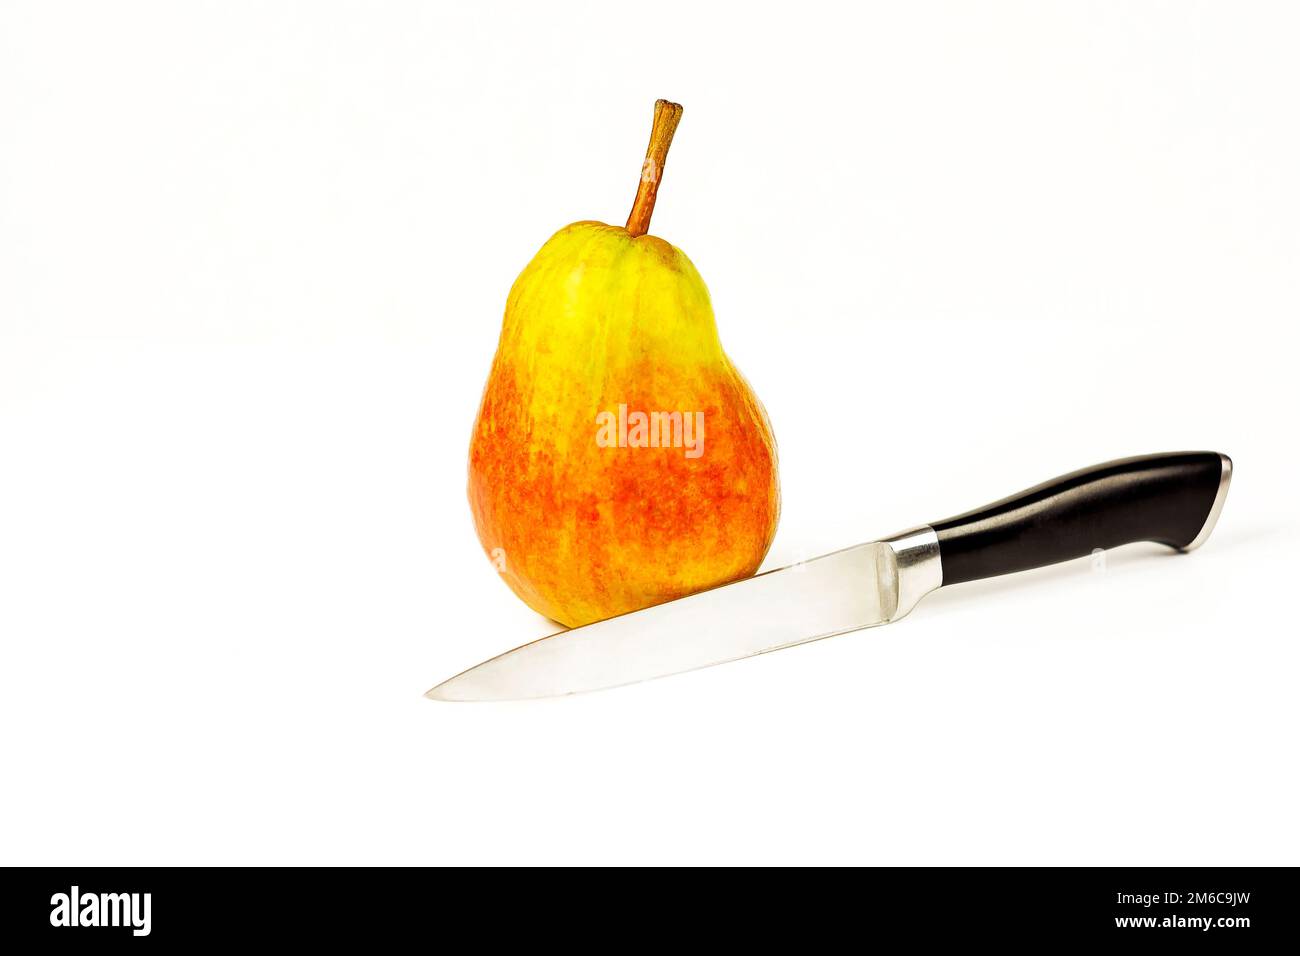 Big knife Cut Out Stock Images & Pictures - Alamy